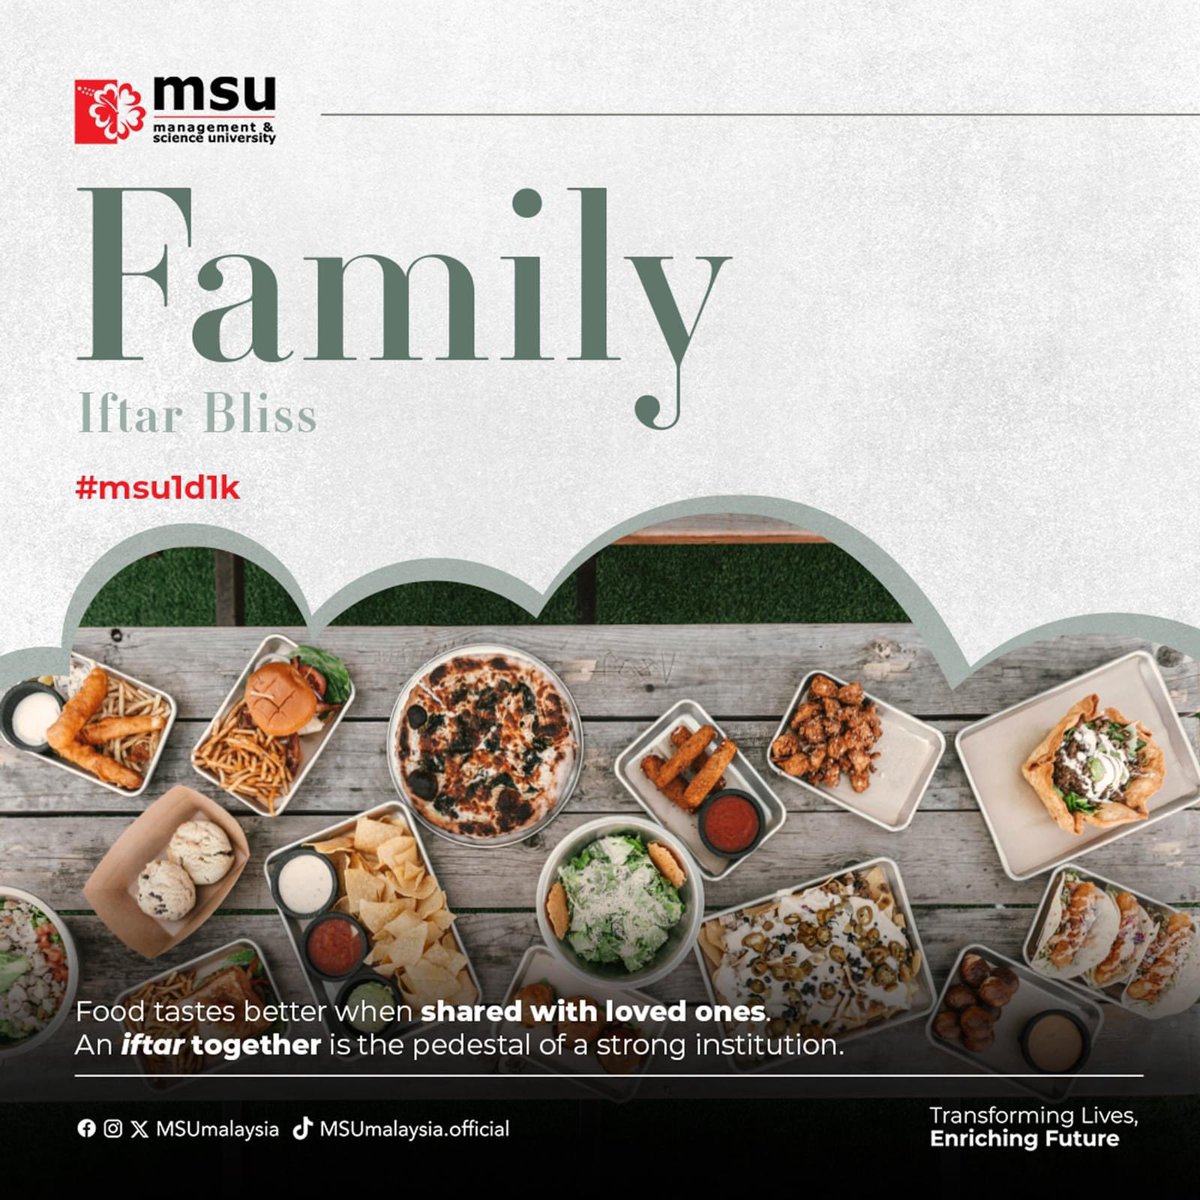 Do you remember the last time you had a great chat with your family over a nice meal? Let's embrace the happy moments of Iftar together with our family tonight.

#MSUmalaysia
#MSU1D1K
#MSUIhyaRamadan

#Repost @MSUmalaysia